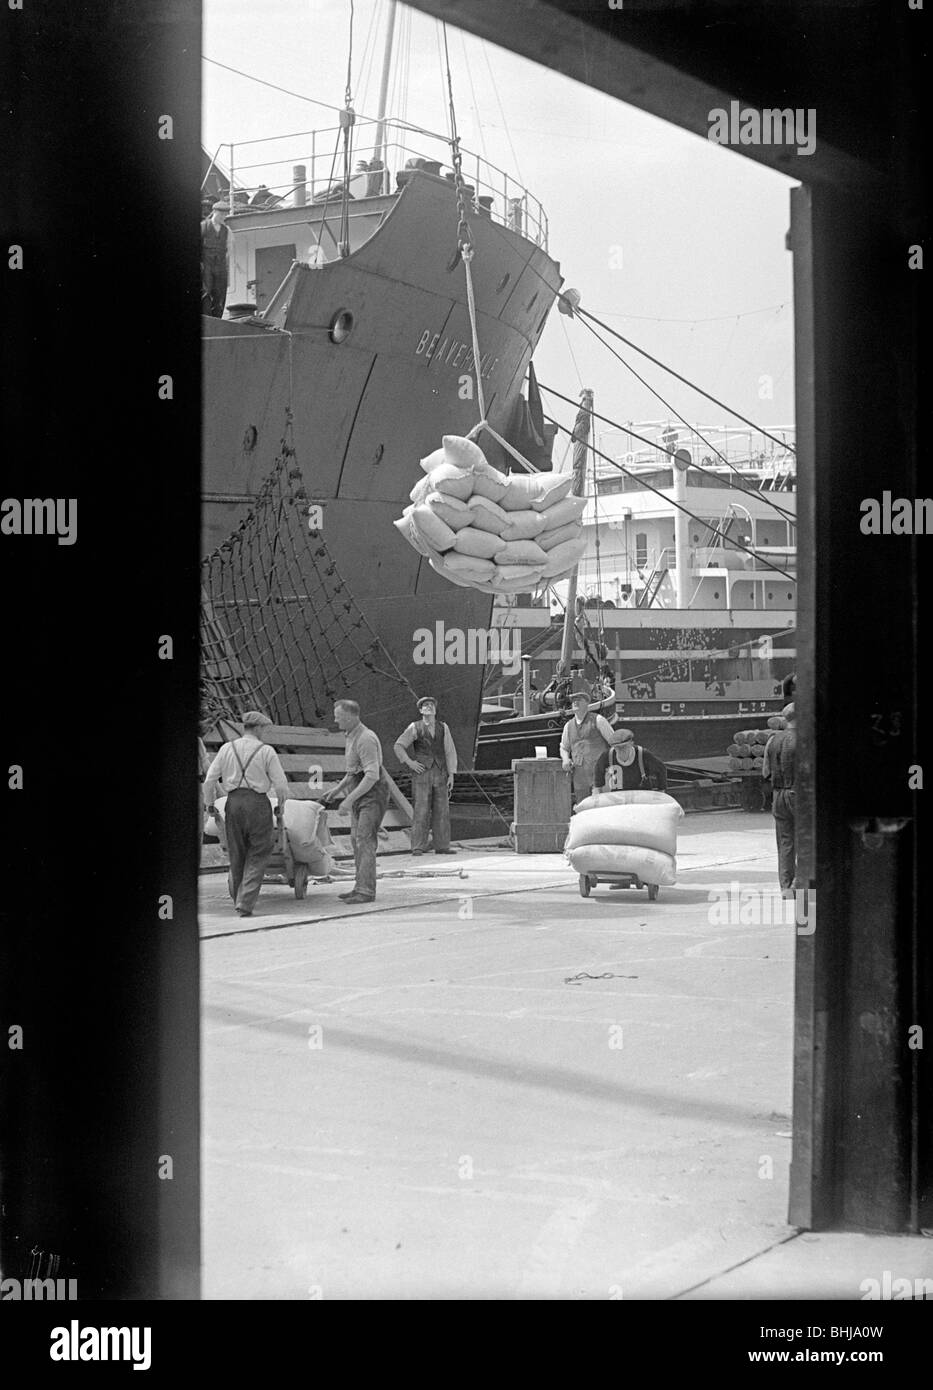 Sacks being loaded onto a ship in London docks, c1945-c1965. Artist: SW Rawlings Stock Photo